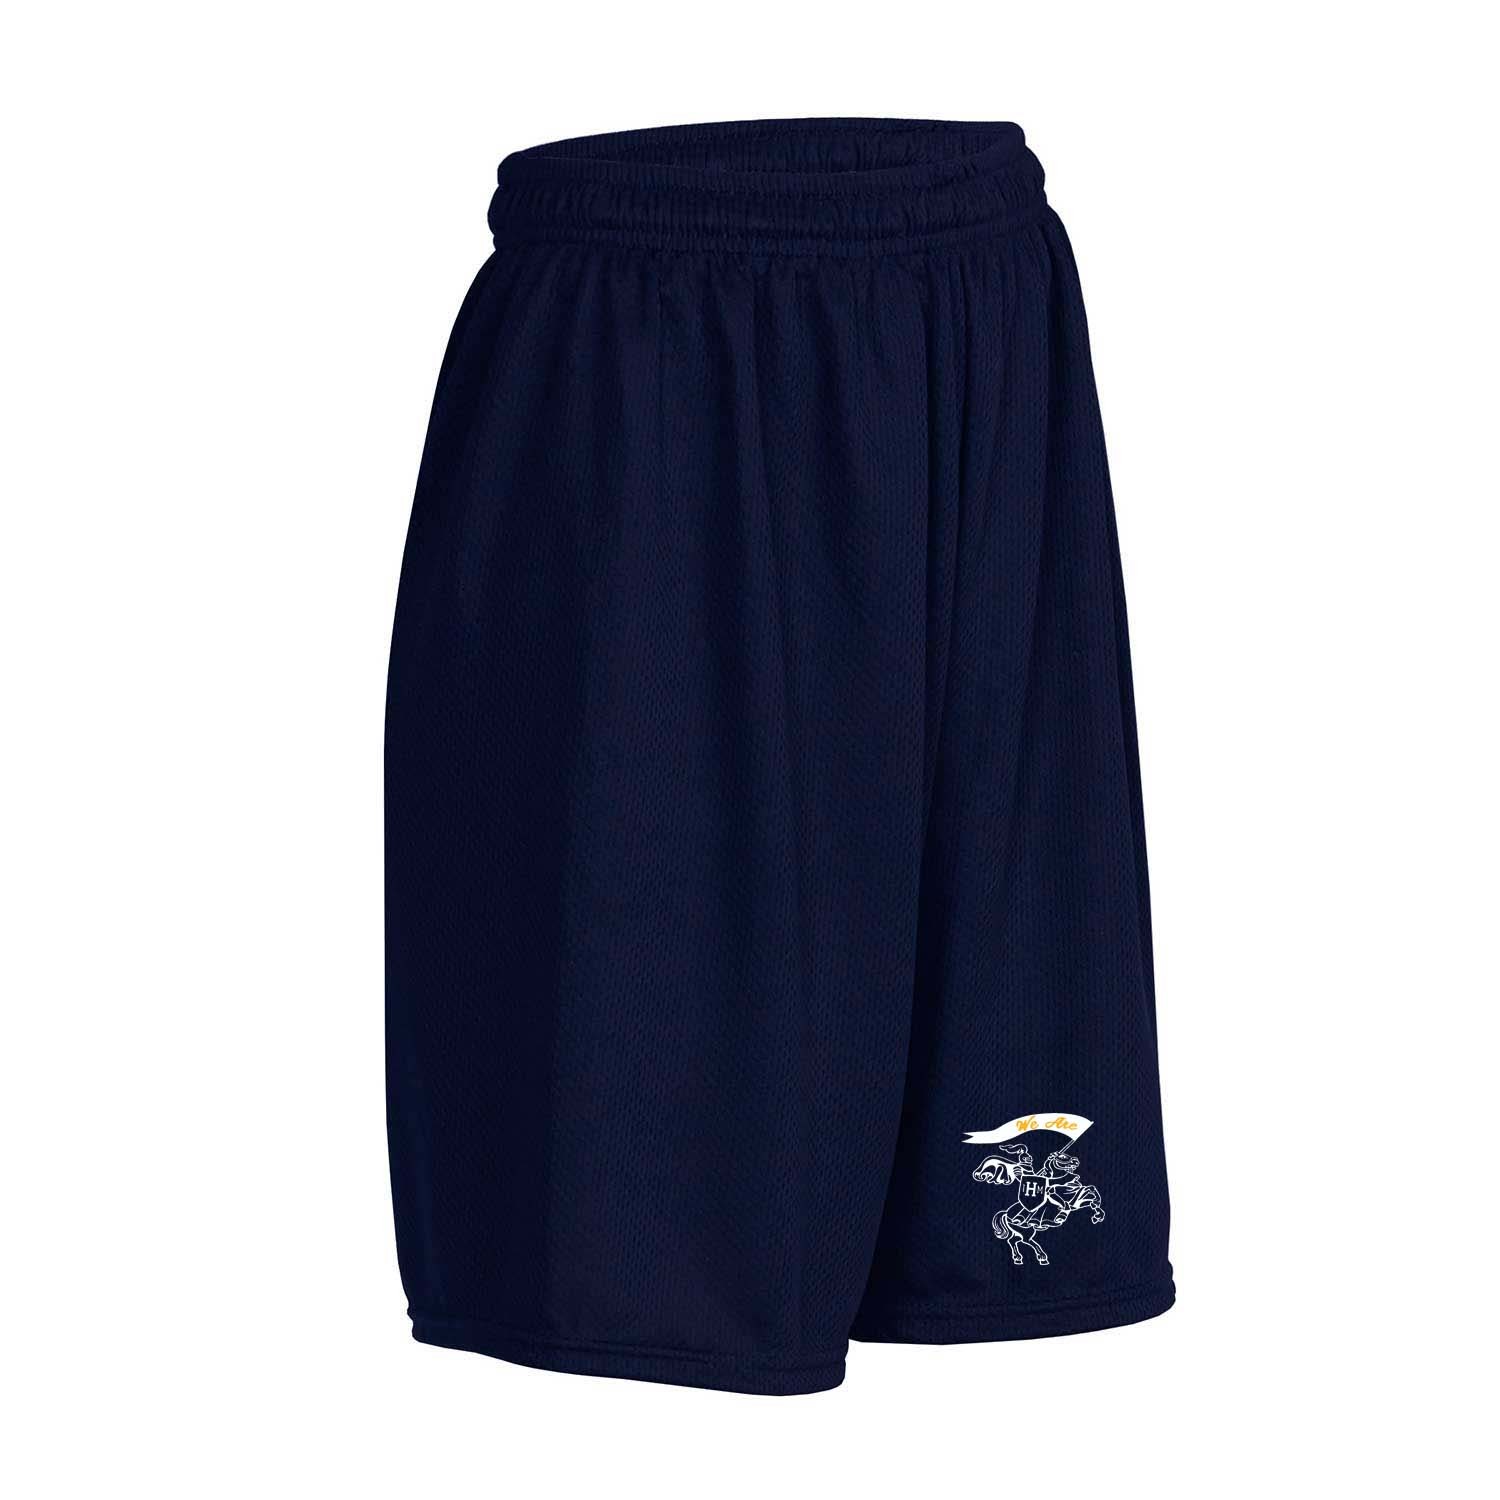 IHM Spirit Gym Shorts w/ White Knight Logo - Please Allow 2-3 Weeks for Delivery